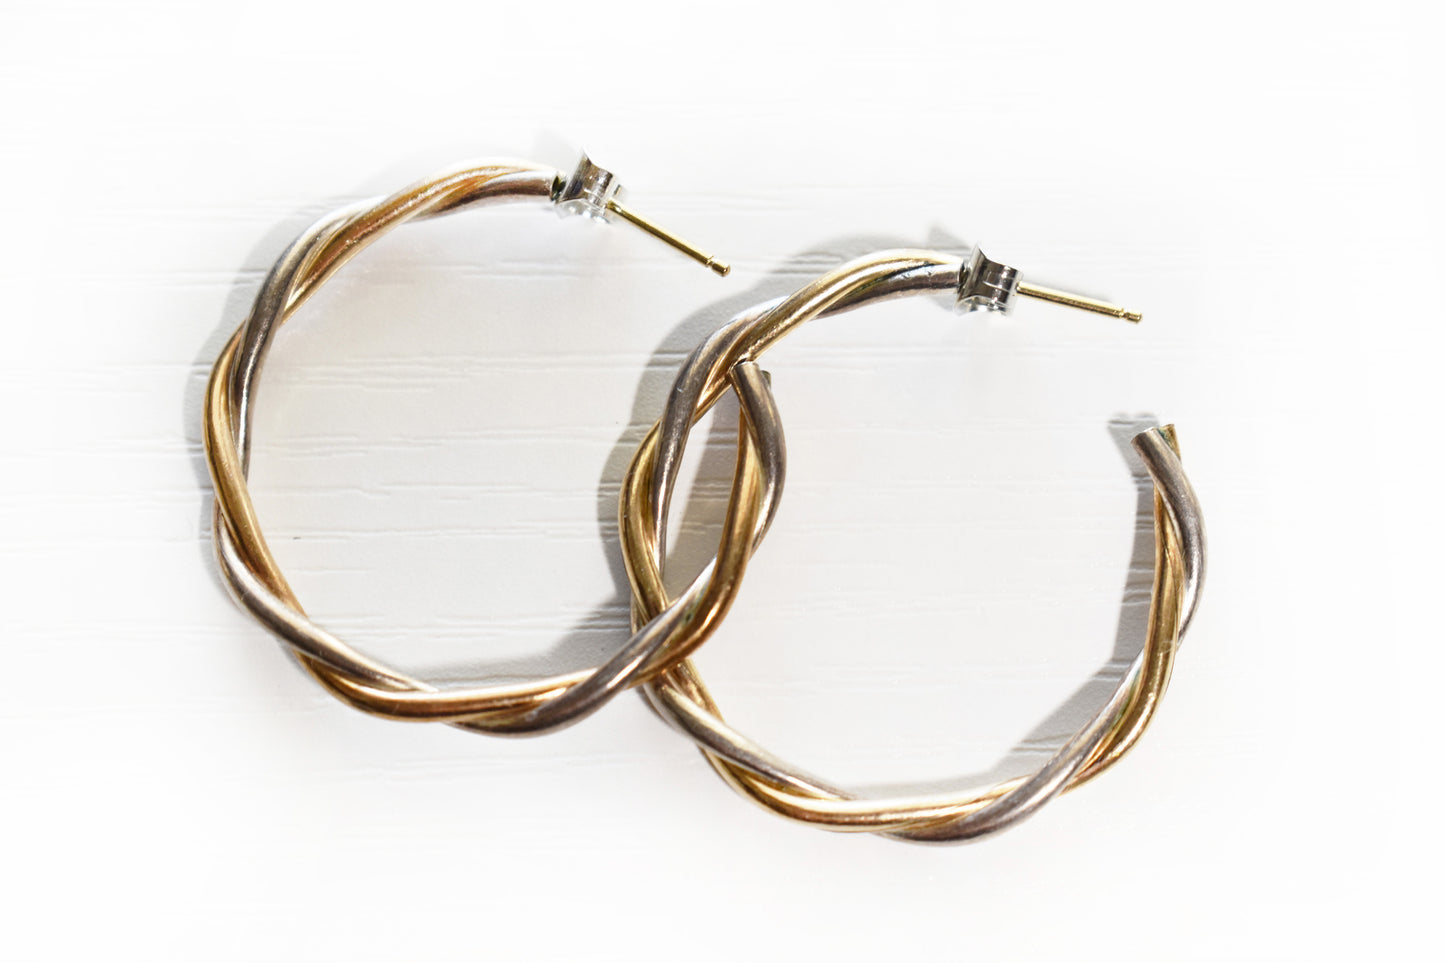 Vintage Two-Toned Twisted Hoops